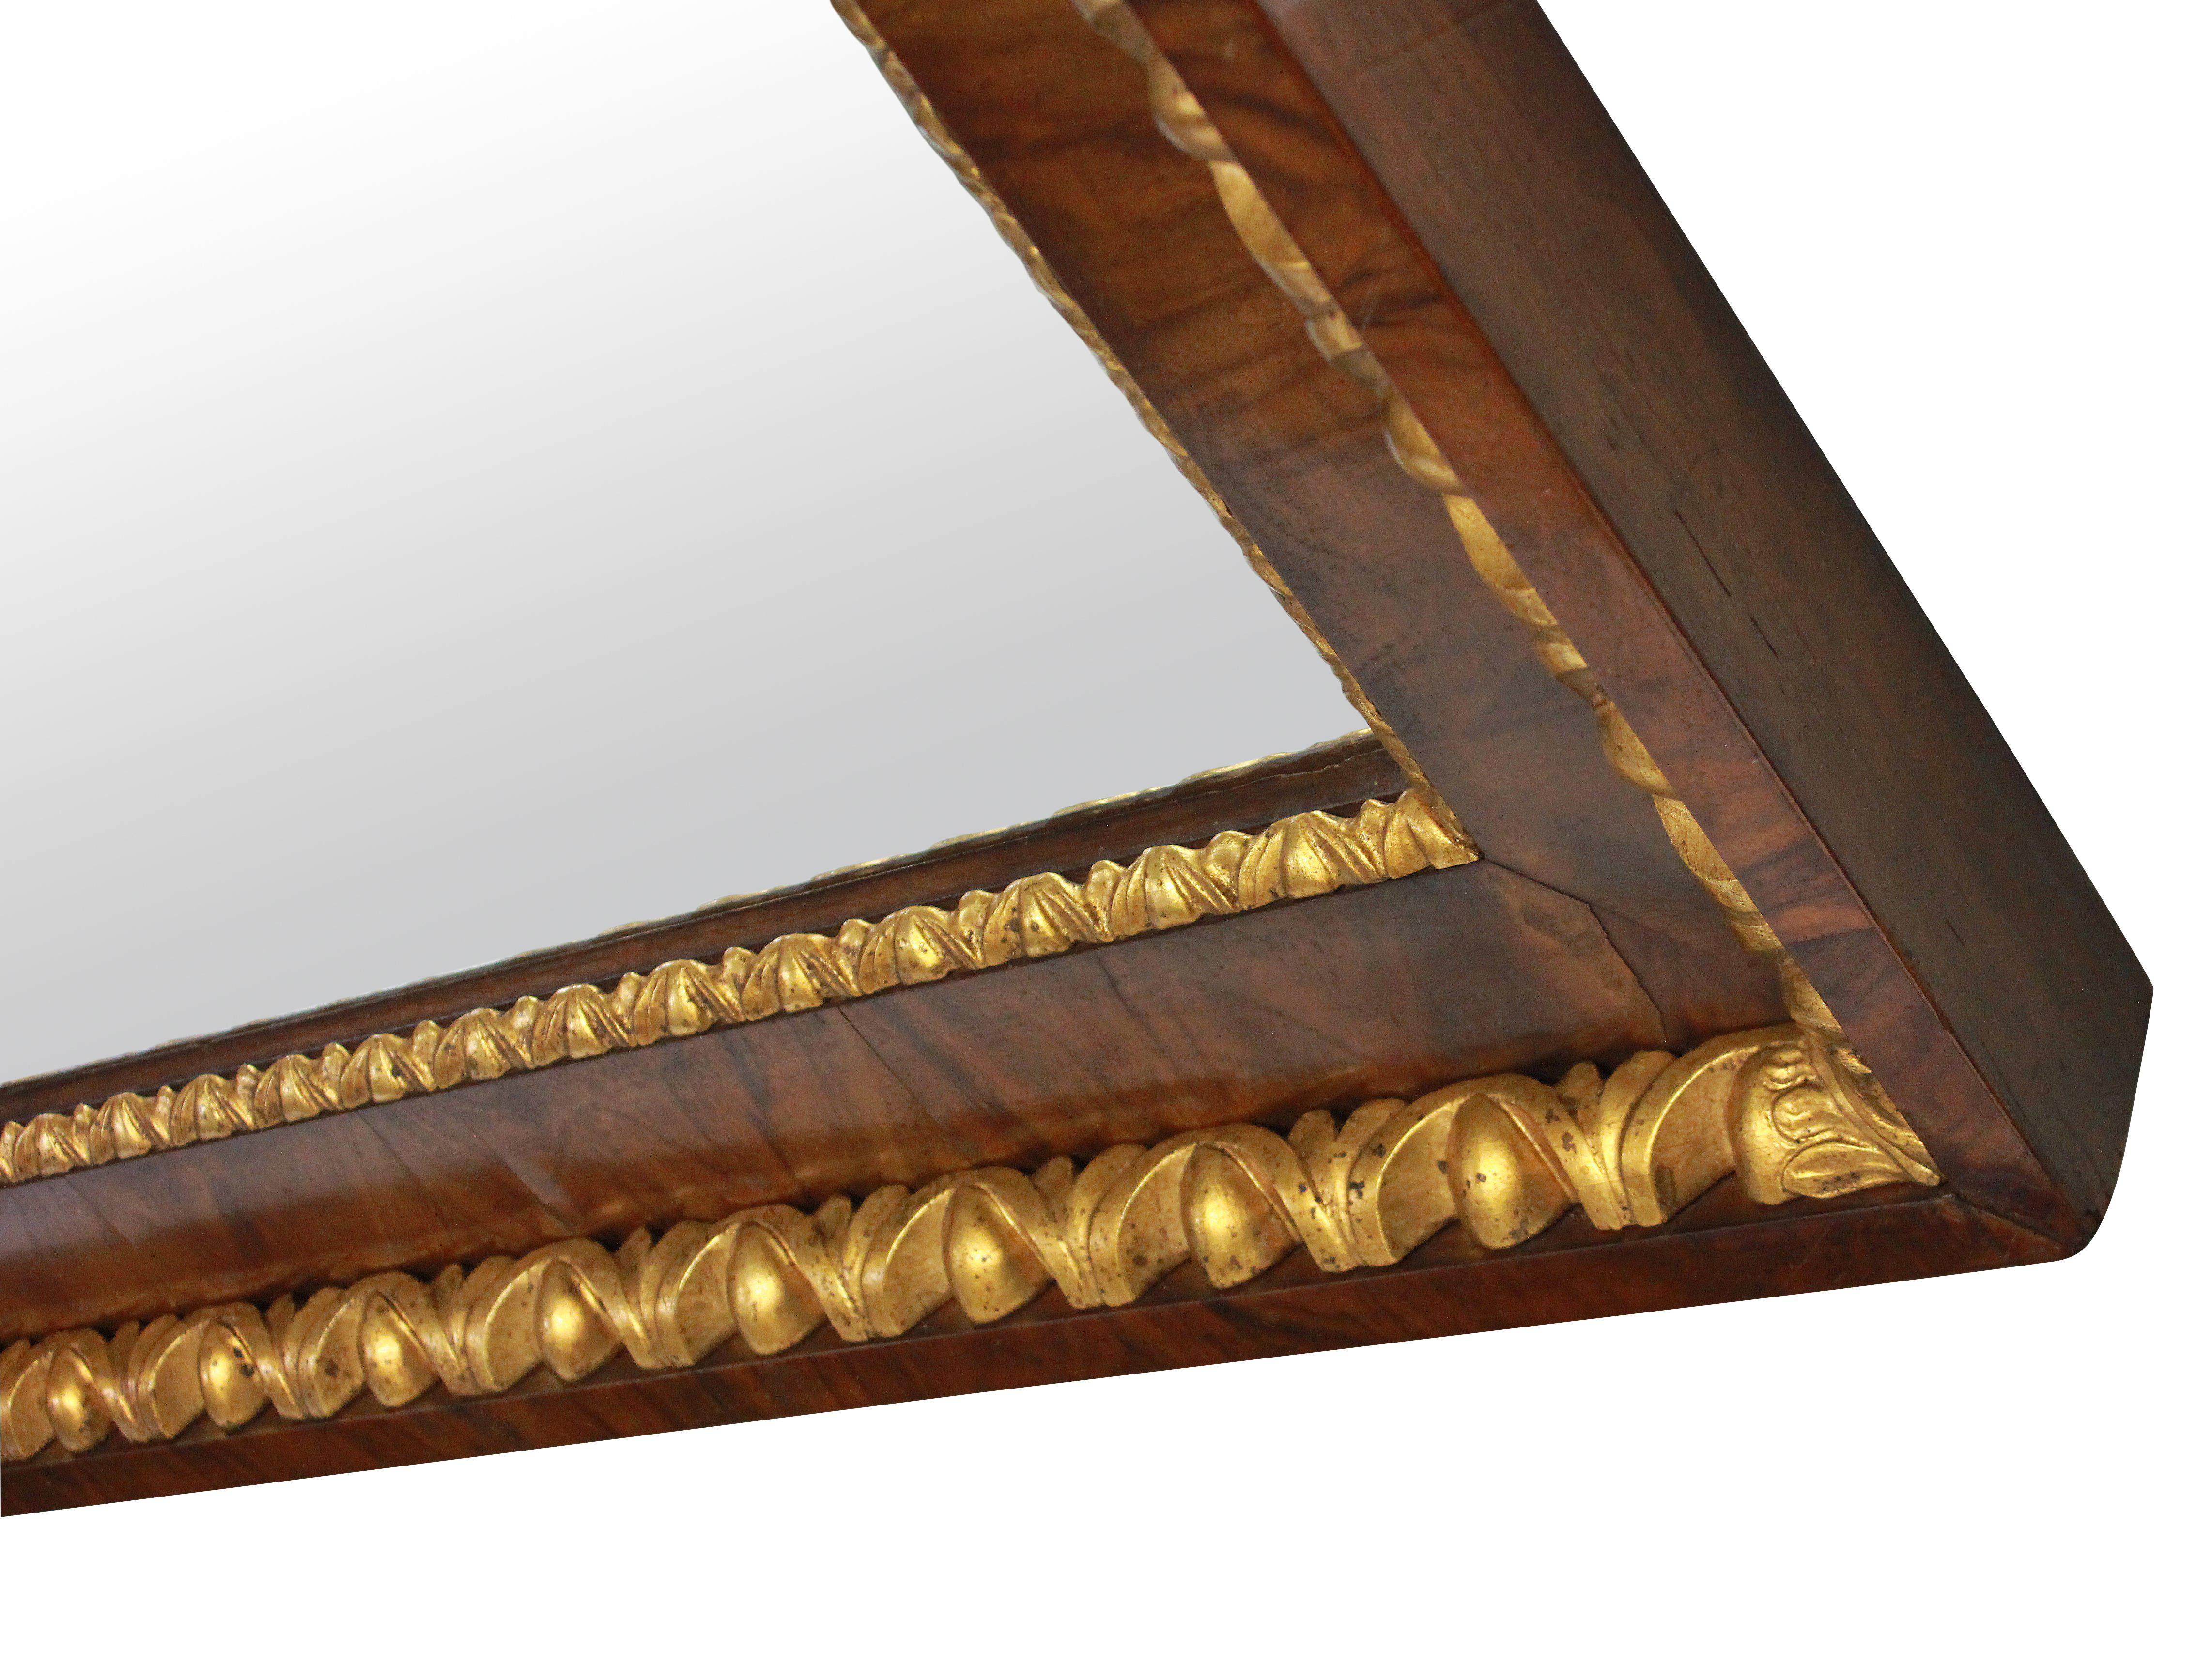 A fine English George II mirror in walnut, with beautifully carved egg and dart water gilded detail. The plate is later.